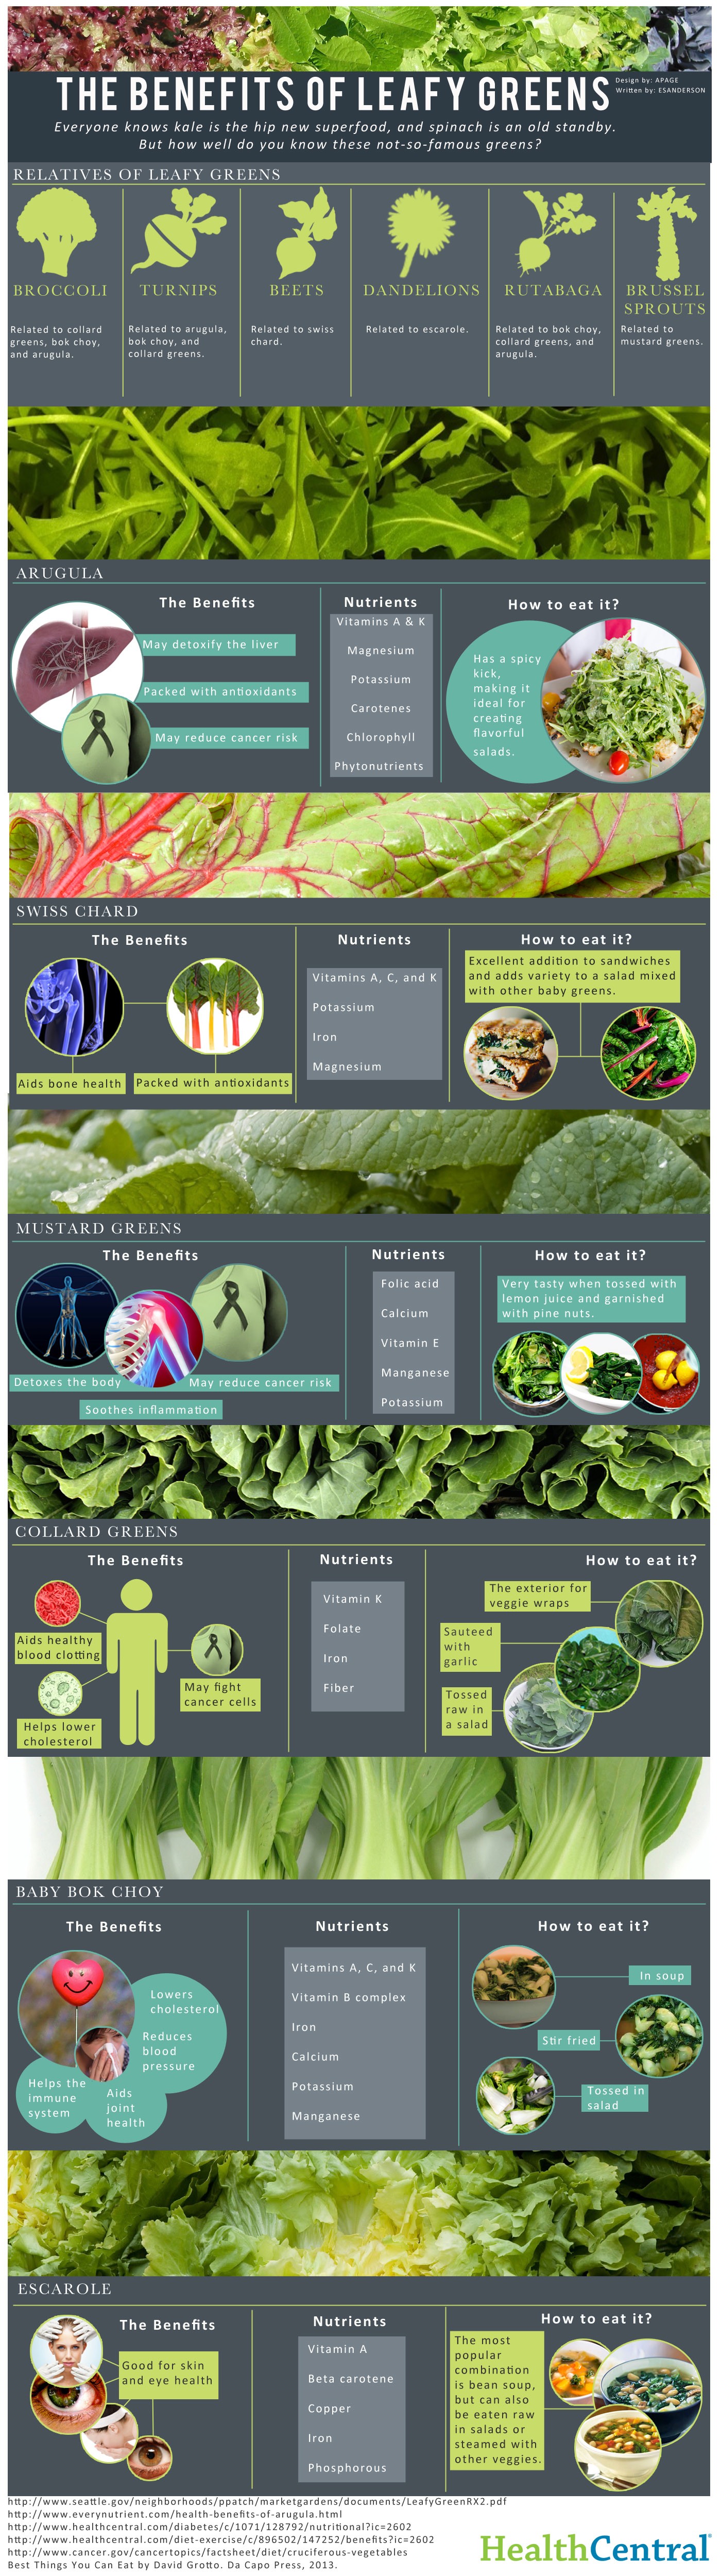 The Not-So-Famous Leafy Greens You Should Know About Infographic